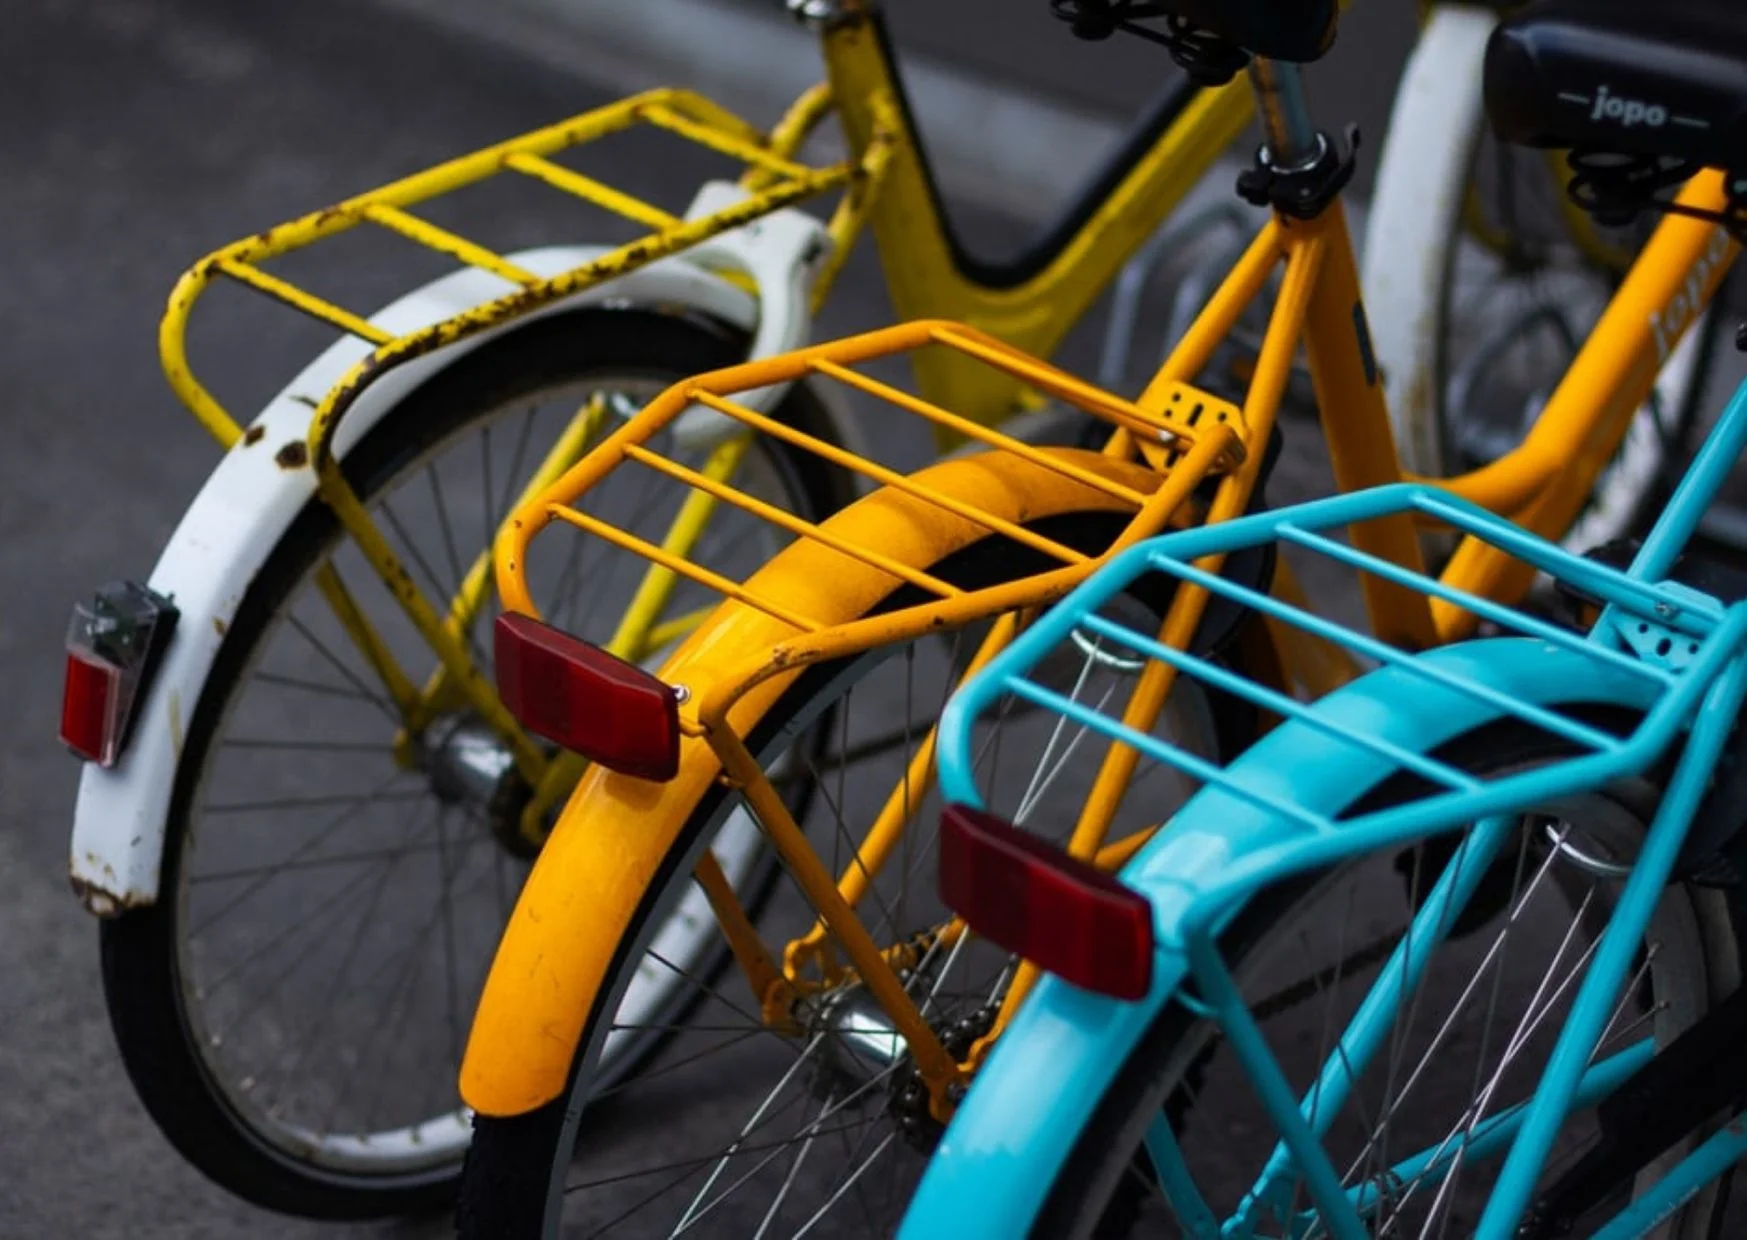 Brussels to extend bike parking network by 2030